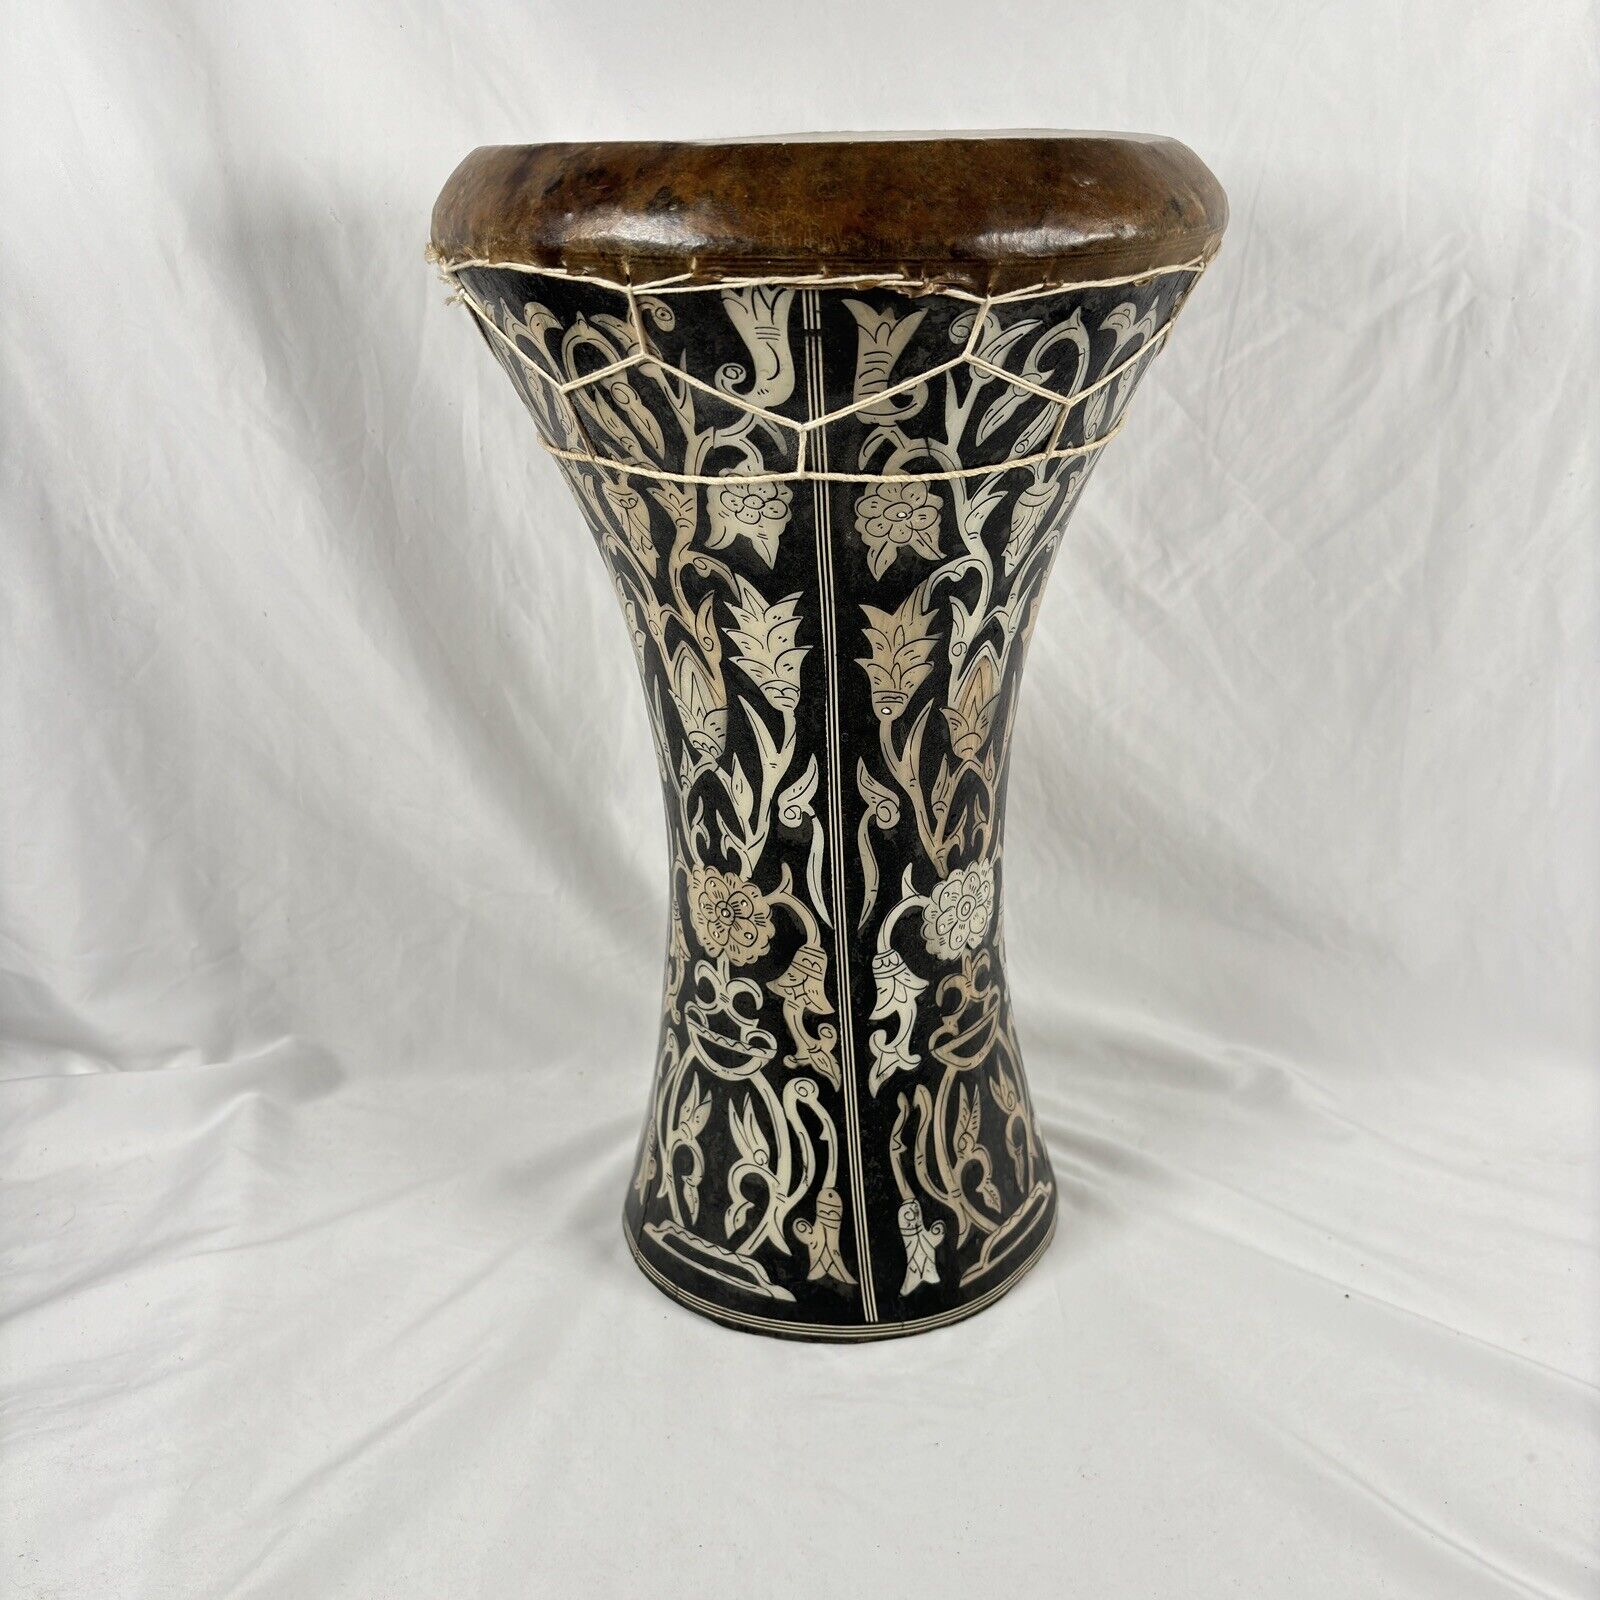 Doumbek Darbuka Drum Handcrafted Wood Shell Animal Skin Pearlescent Inlays 10.5”